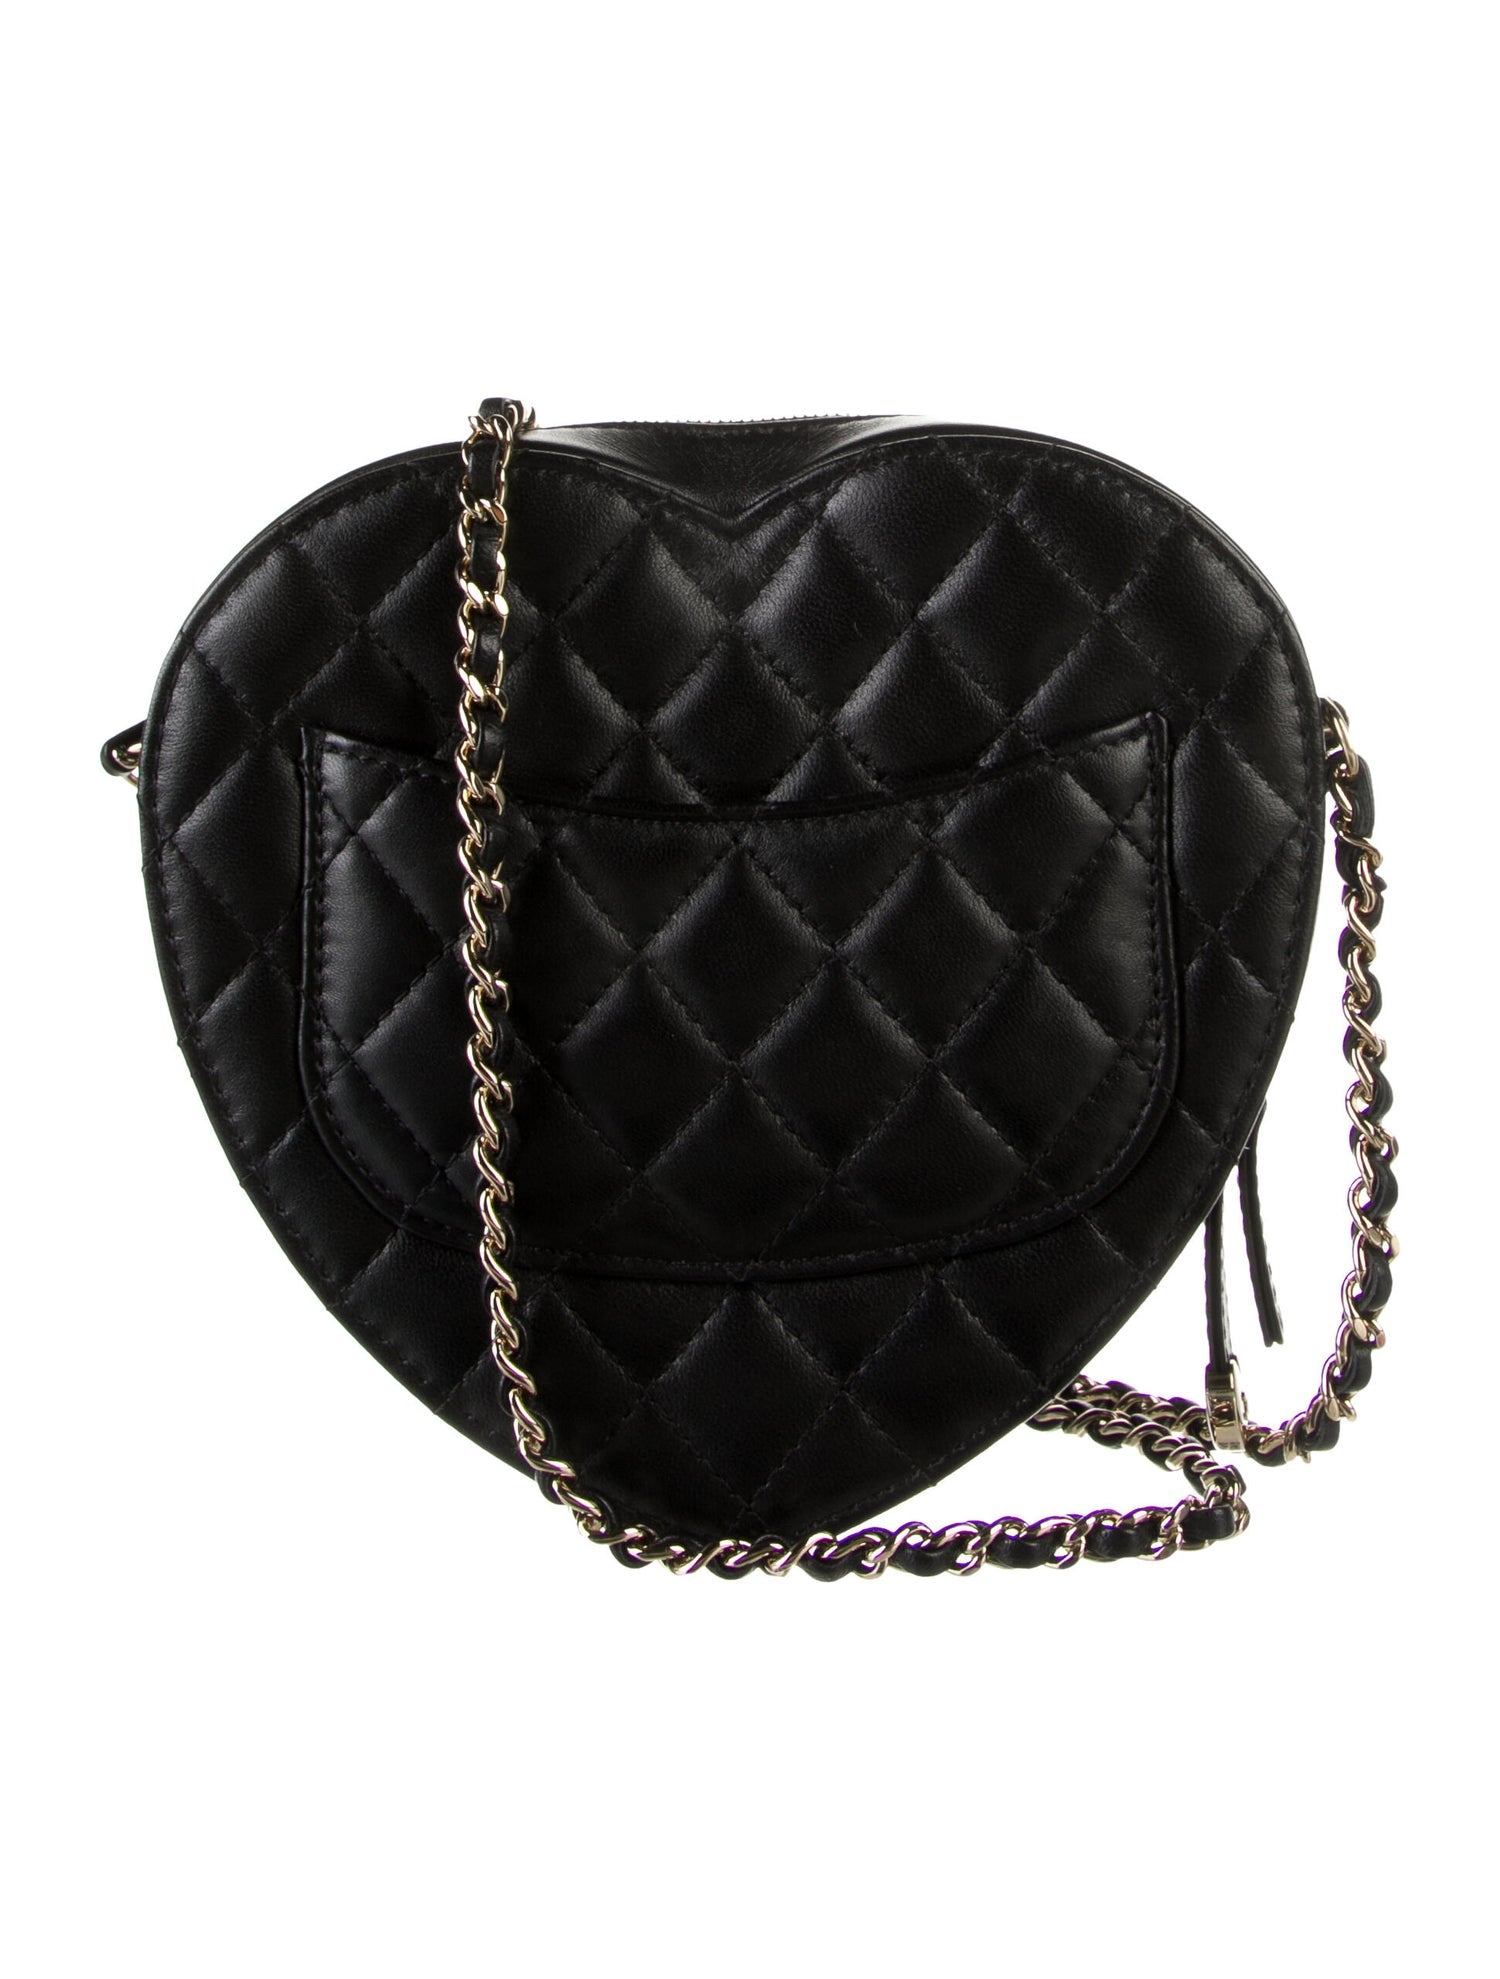 new chanel heart bag large